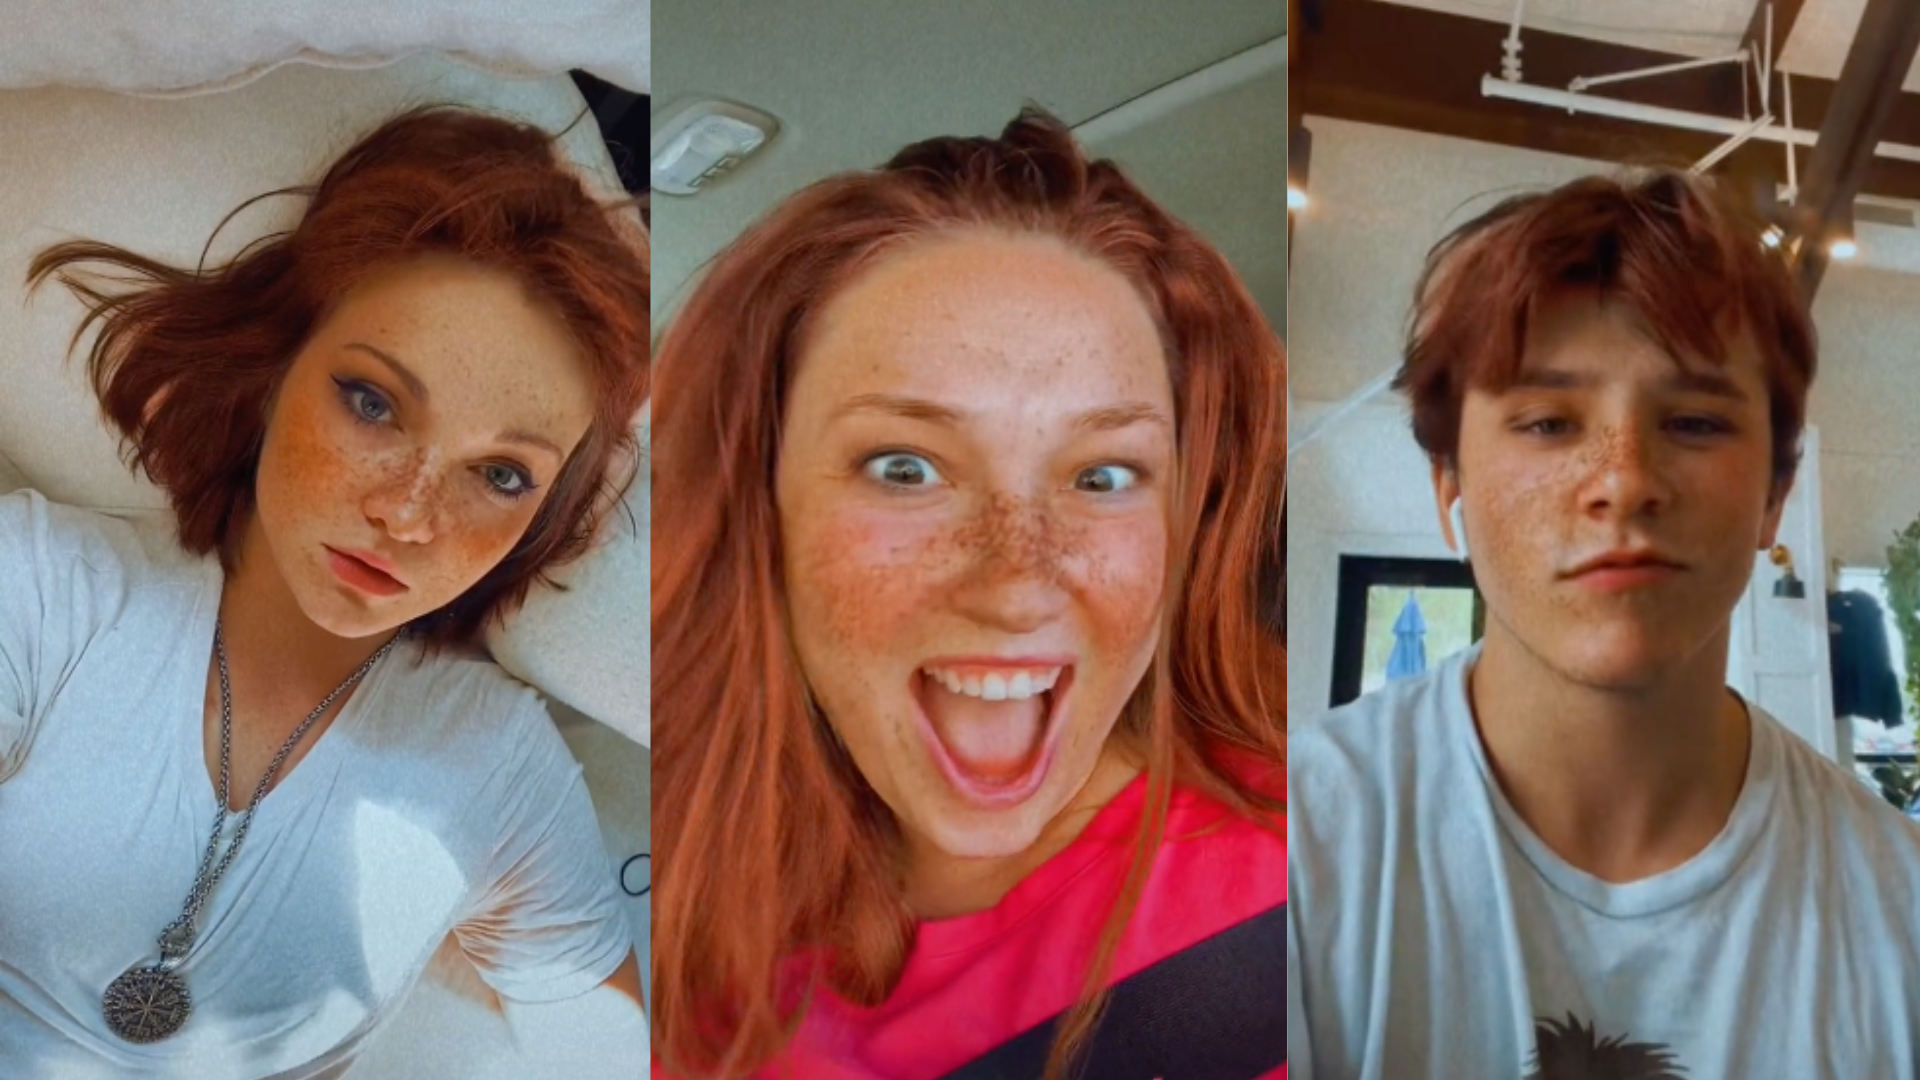 Are TikTok Filters Going Too Far? A New “Ginger” Filter Is Trending